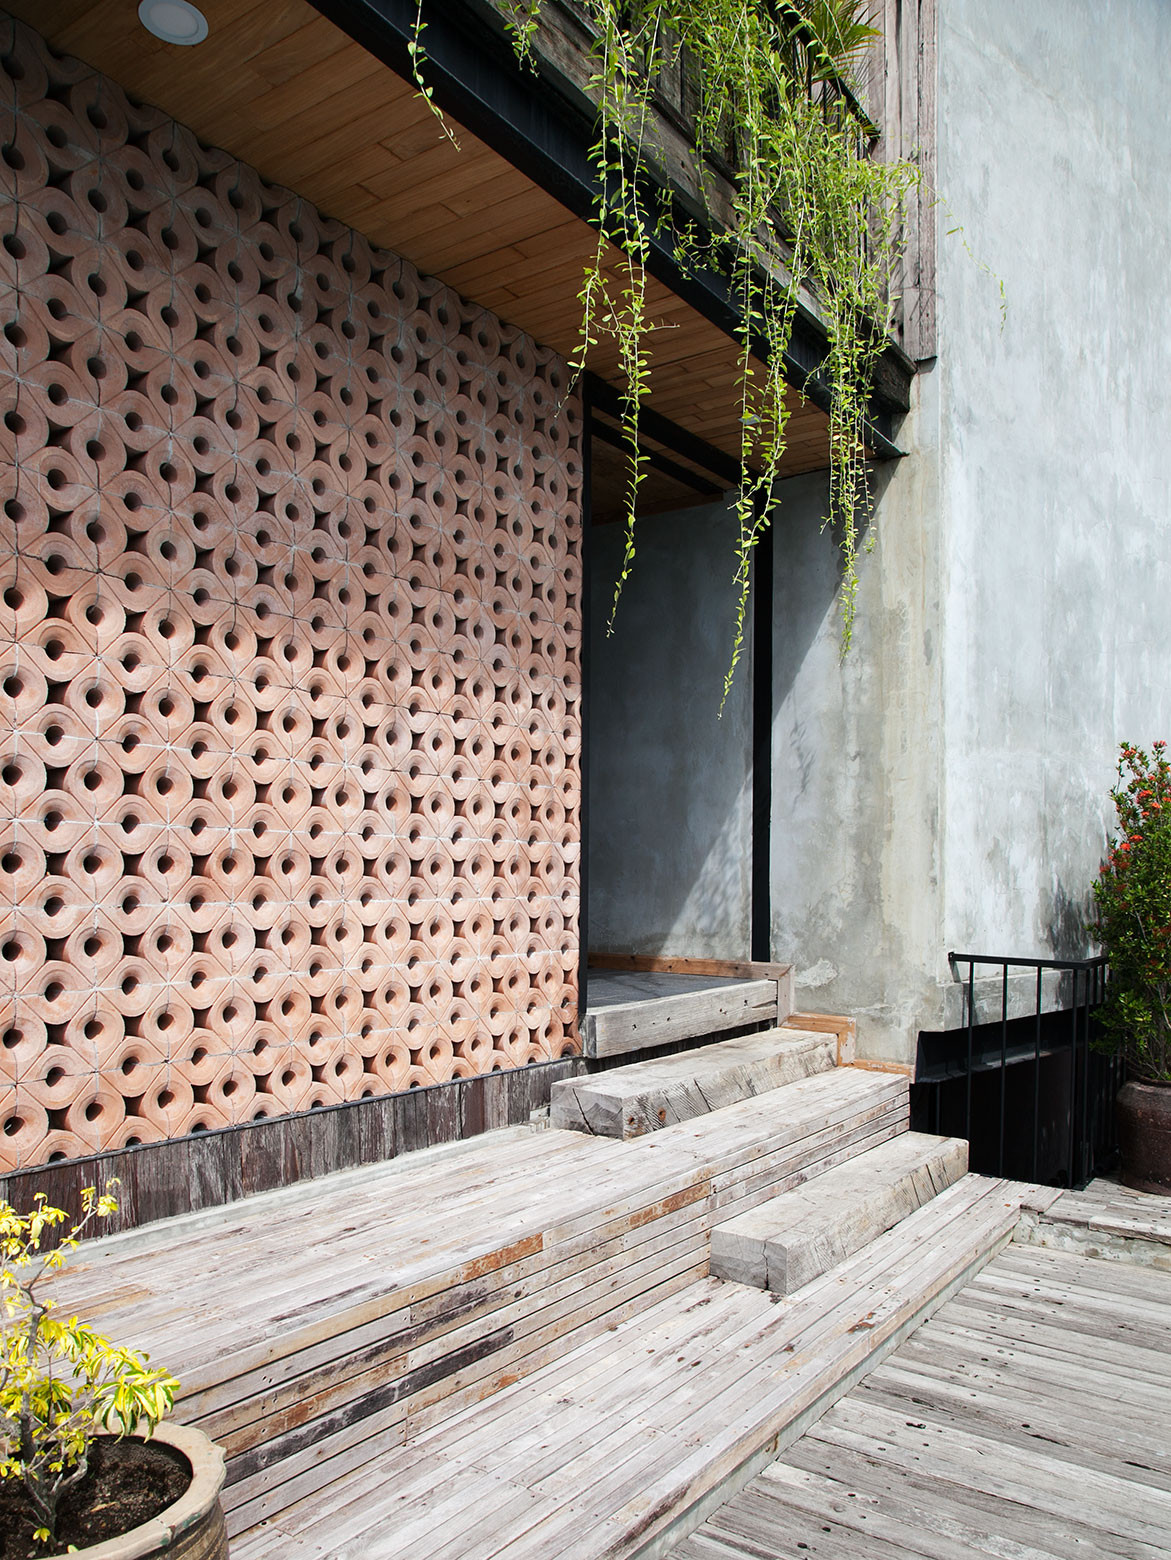 DDAP Architect Create A Tropical Oasis For Working Expats In Bali | breeze blocks